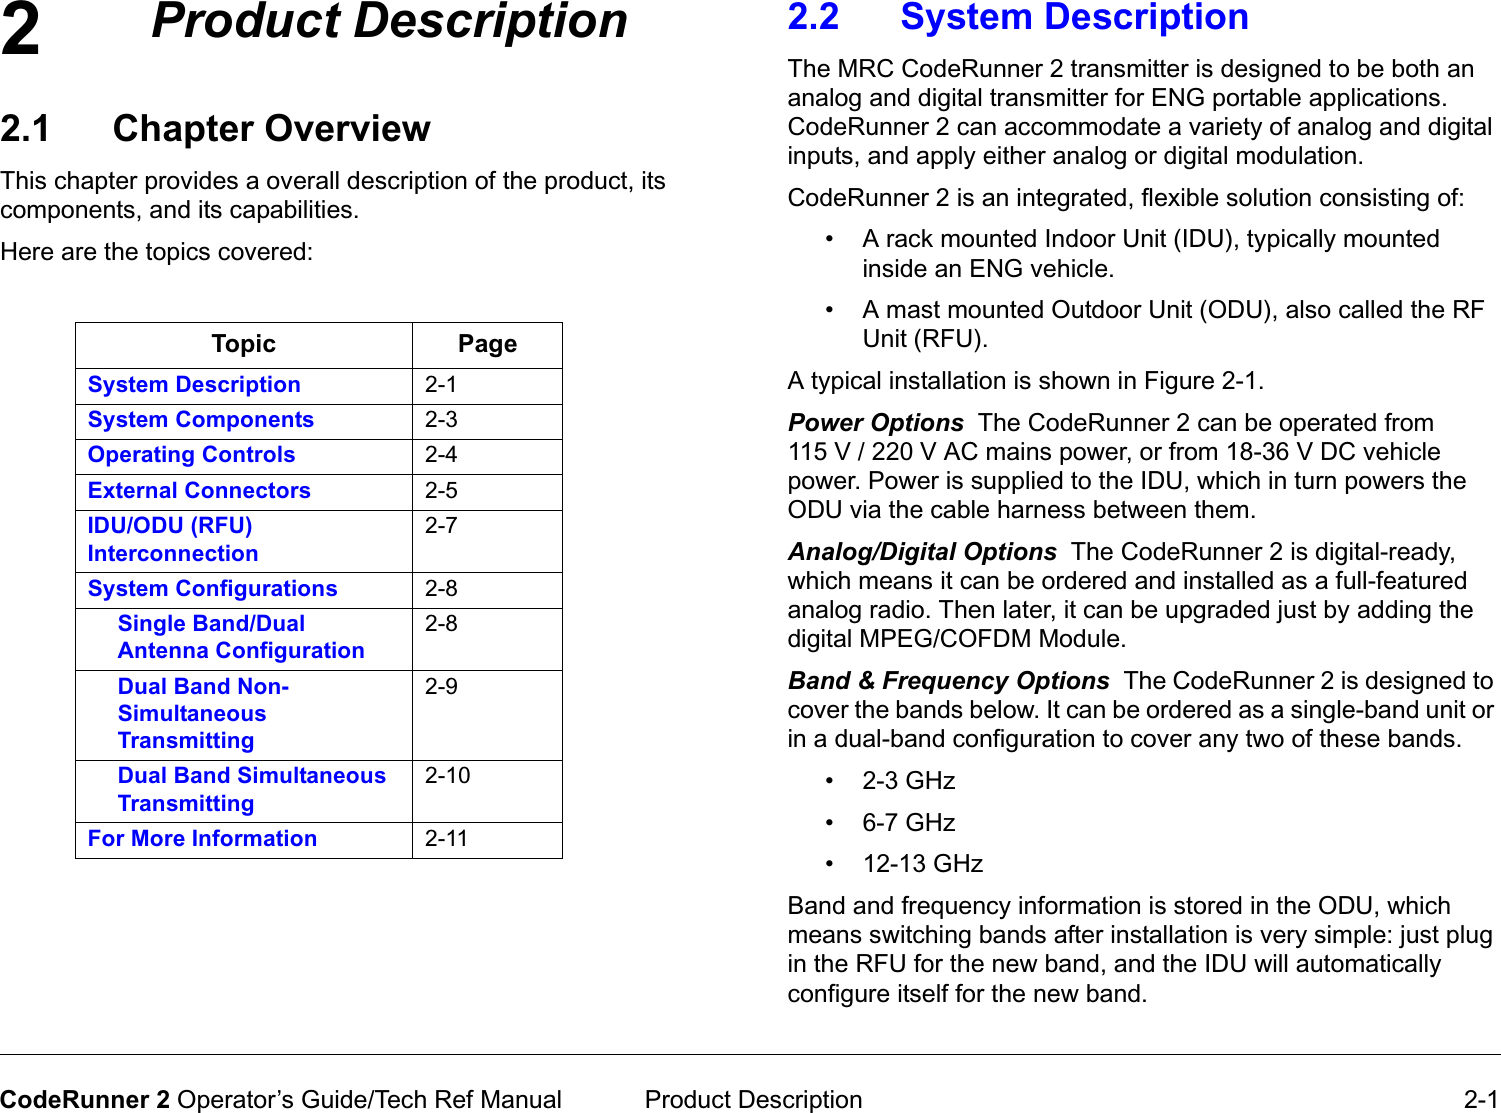 2 Product Description 2-1CodeRunner 2 Operator’s Guide/Tech Ref ManualProductDescription2.1 Chapter OverviewThis chapter provides a overall description of the product, its components, and its capabilities. Here are the topics covered:Topic PageSystem Description 2-1System Components 2-3Operating Controls 2-4External Connectors 2-5IDU/ODU (RFU) Interconnection2-7System Configurations 2-8Single Band/Dual Antenna Configuration2-8Dual Band Non-Simultaneous Transmitting2-9Dual Band Simultaneous Transmitting2-10For More Information 2-112.2 System Description  The MRC CodeRunner 2 transmitter is designed to be both an analog and digital transmitter for ENG portable applications. CodeRunner 2 can accommodate a variety of analog and digital inputs, and apply either analog or digital modulation. CodeRunner 2 is an integrated, flexible solution consisting of:• A rack mounted Indoor Unit (IDU), typically mounted inside an ENG vehicle.• A mast mounted Outdoor Unit (ODU), also called the RF Unit (RFU). A typical installation is shown in Figure 2-1.PowerOptionsThe CodeRunner 2 can be operated from 115 V / 220 V AC mains power, or from 18-36 V DC vehicle power. Power is supplied to the IDU, which in turn powers the ODU via the cable harness between them. Analog/DigitalOptionsThe CodeRunner 2 is digital-ready, which means it can be ordered and installed as a full-featured analog radio. Then later, it can be upgraded just by adding the digital MPEG/COFDM Module.Band&amp;FrequencyOptionsThe CodeRunner 2 is designed to cover the bands below. It can be ordered as a single-band unit or in a dual-band configuration to cover any two of these bands. • 2-3 GHz• 6-7 GHz• 12-13 GHzBand and frequency information is stored in the ODU, which means switching bands after installation is very simple: just plug in the RFU for the new band, and the IDU will automatically configure itself for the new band. 